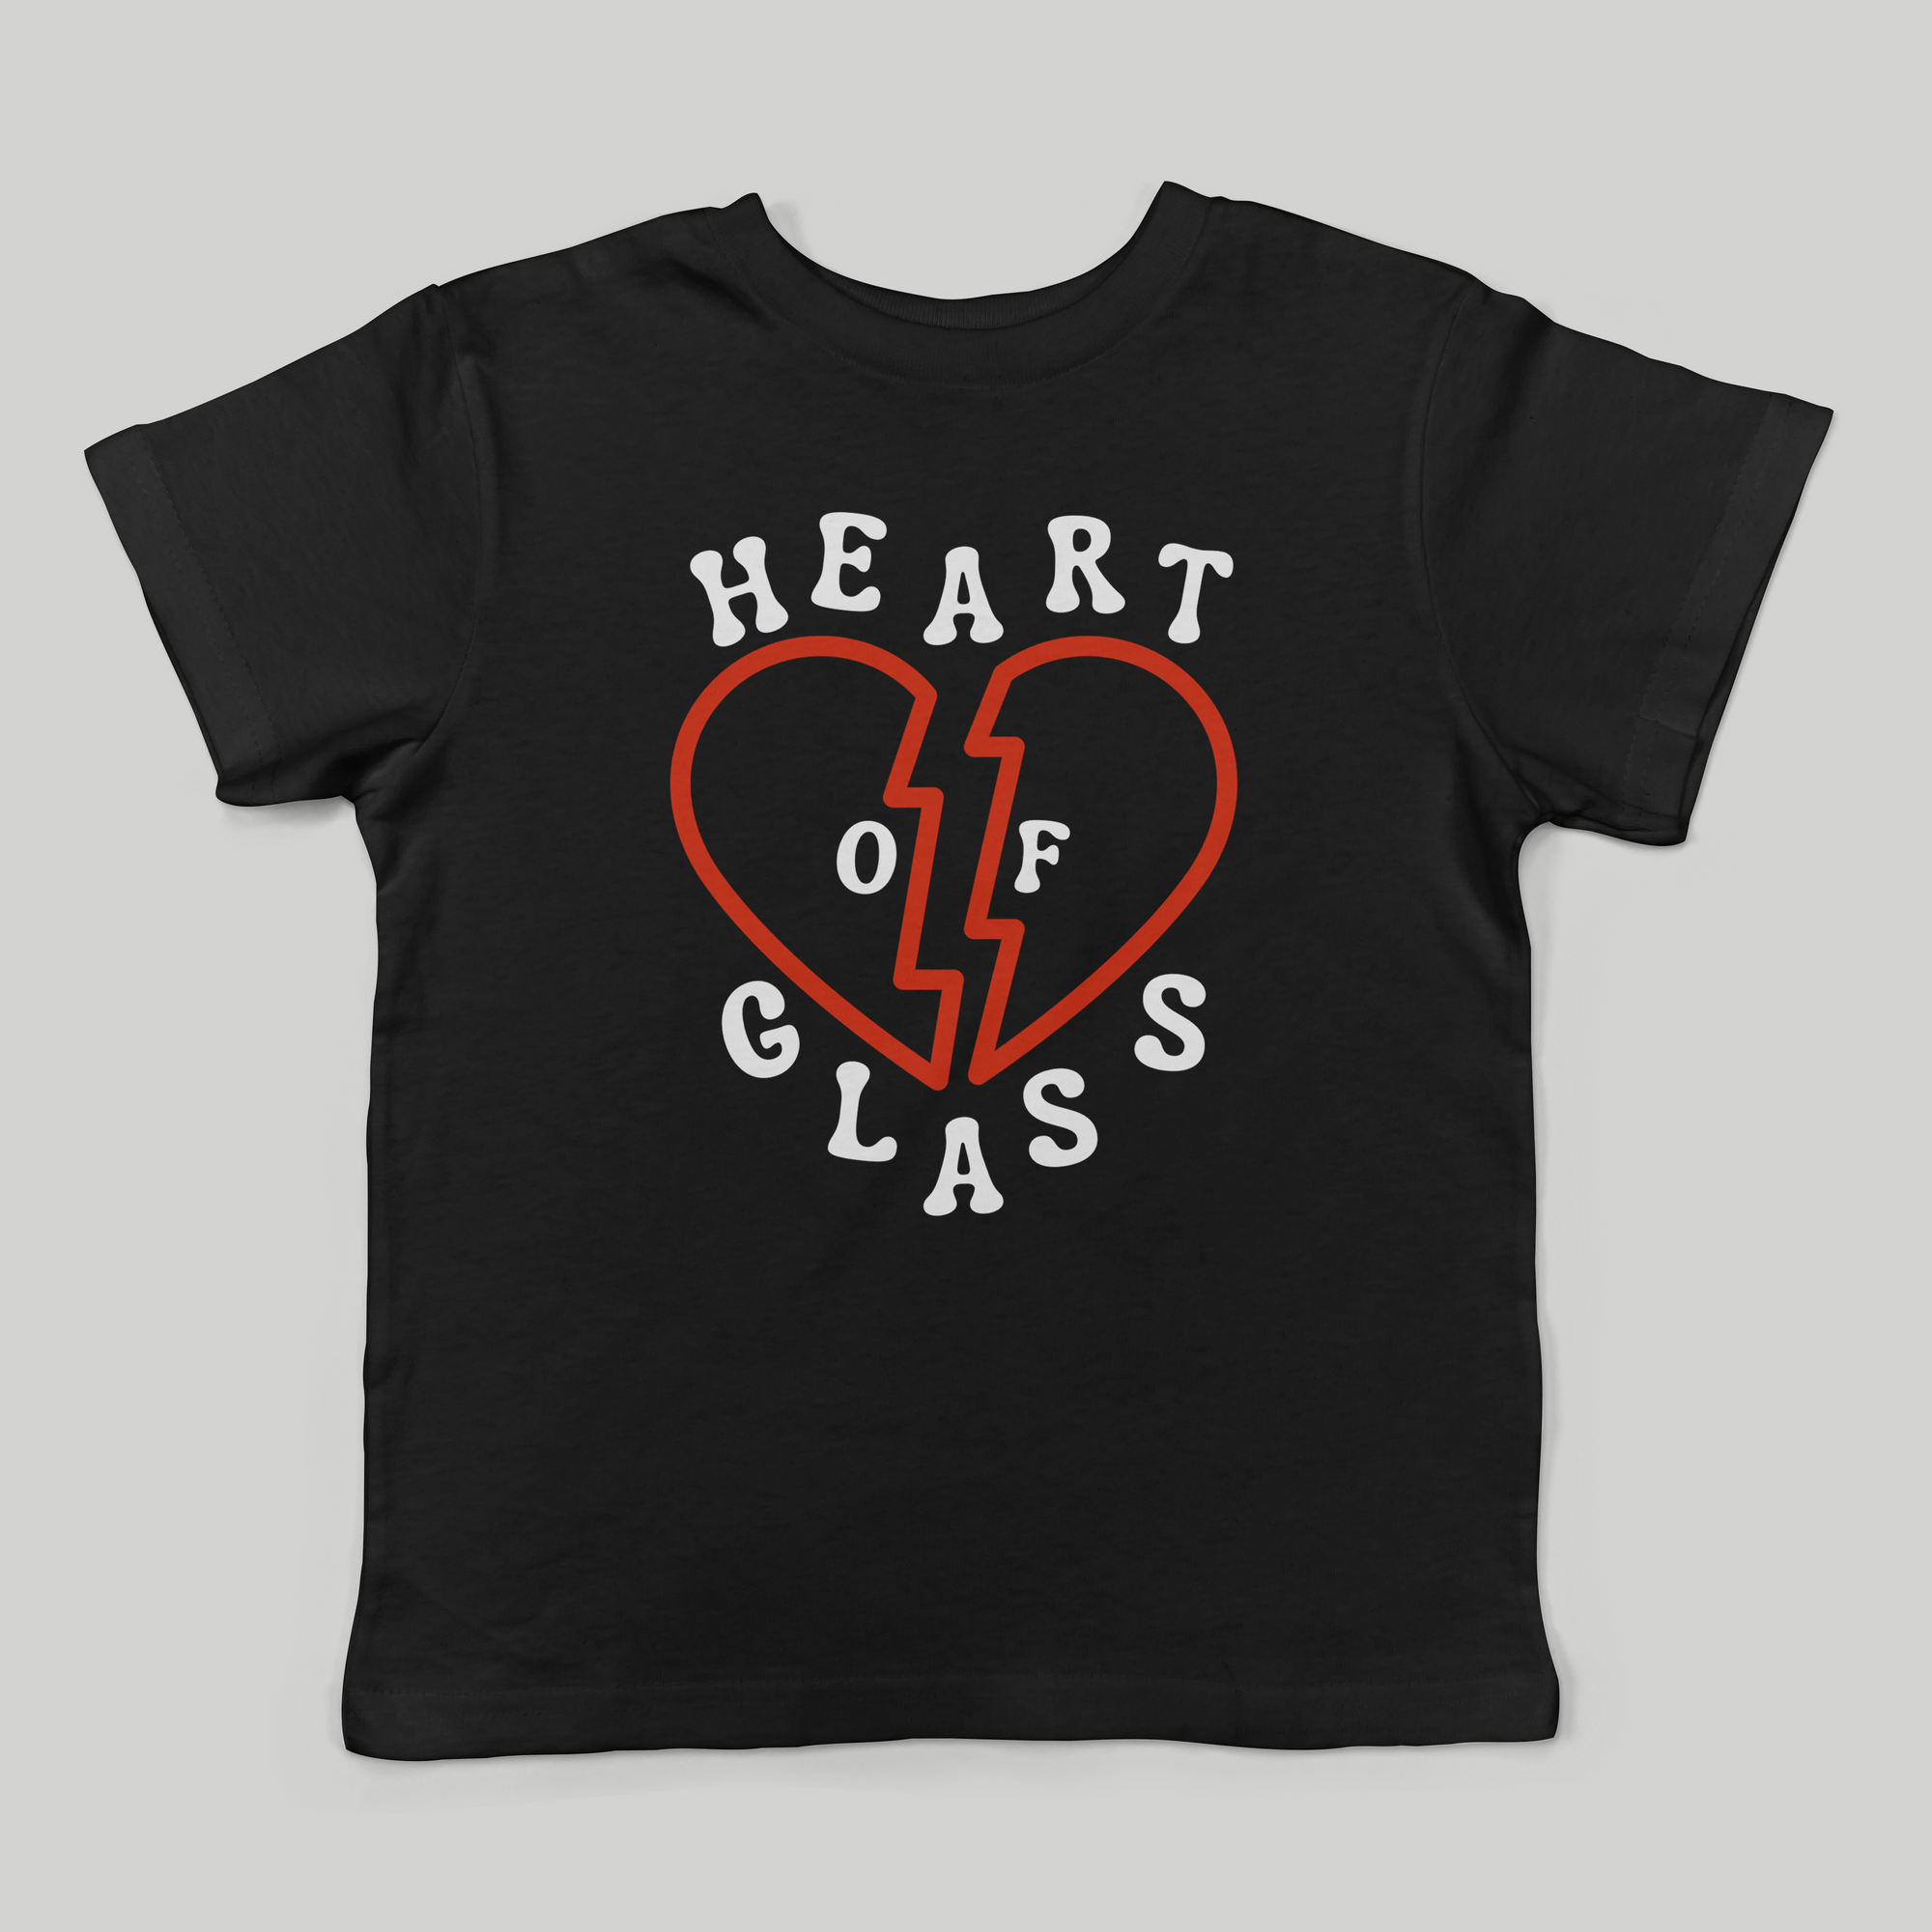 Heart of Glass Tee for Kids